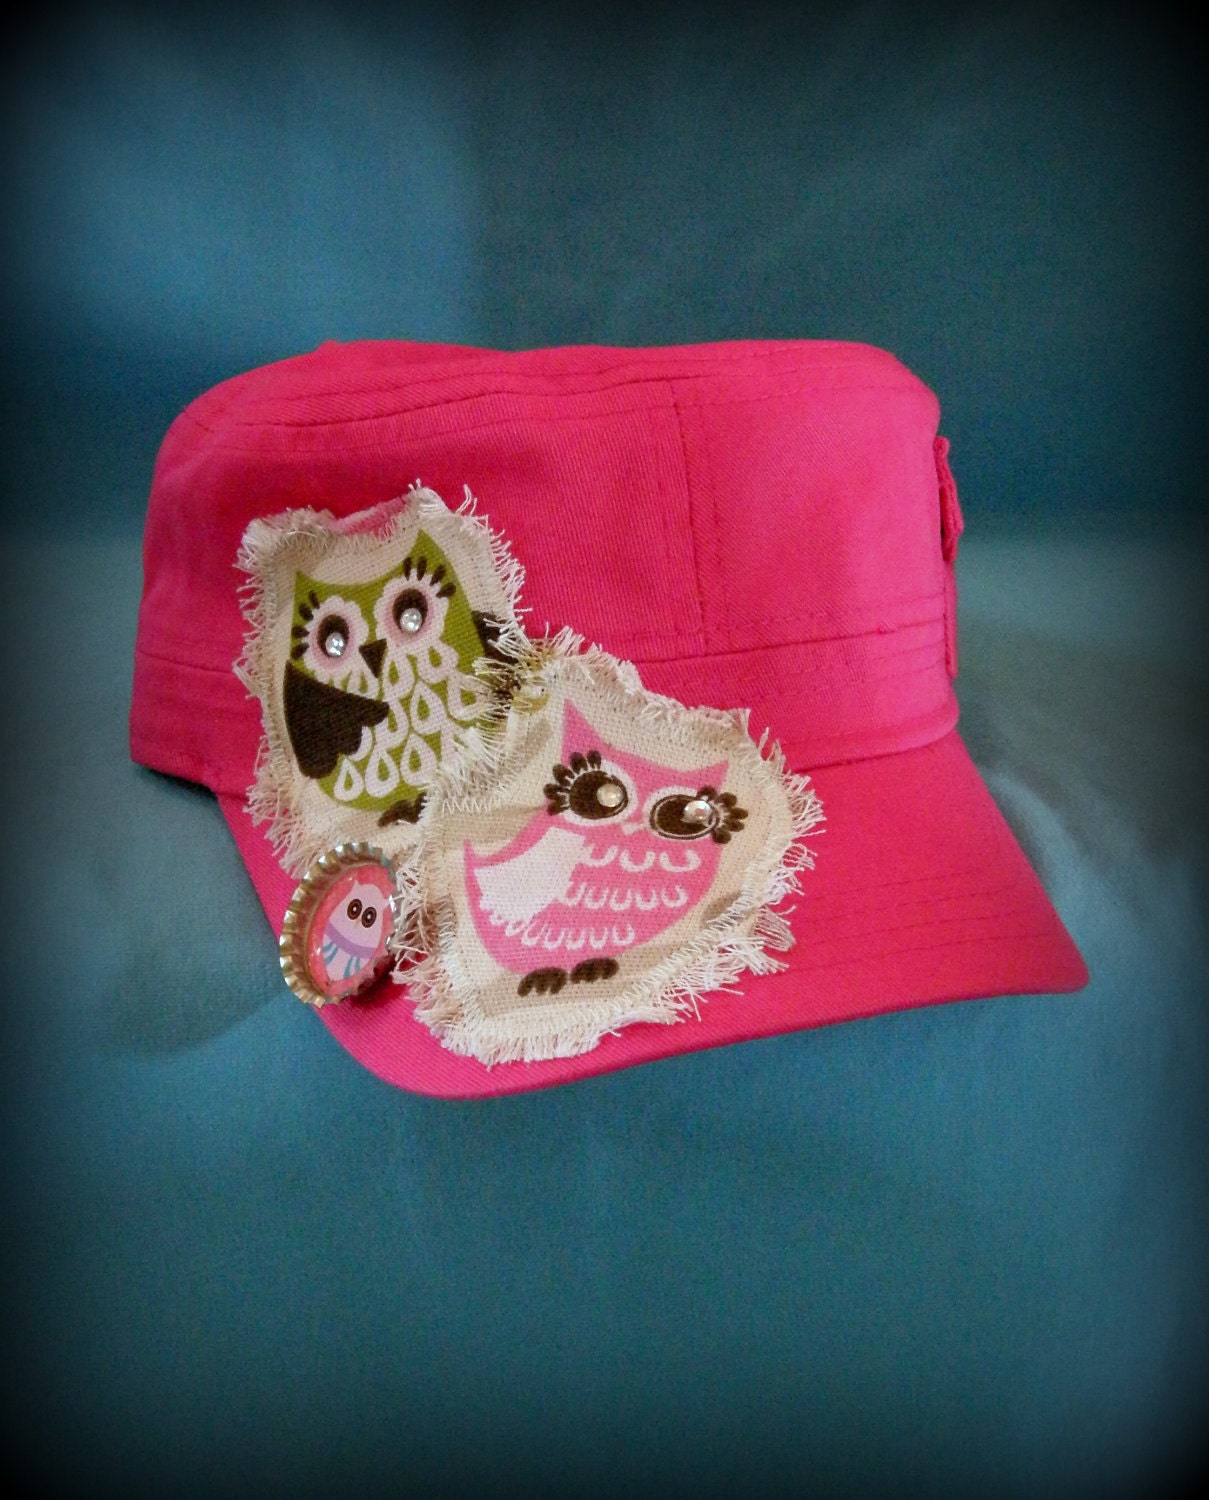 Ladies Pink Cadet Cap with Owls and added embellishments for great style and bling.